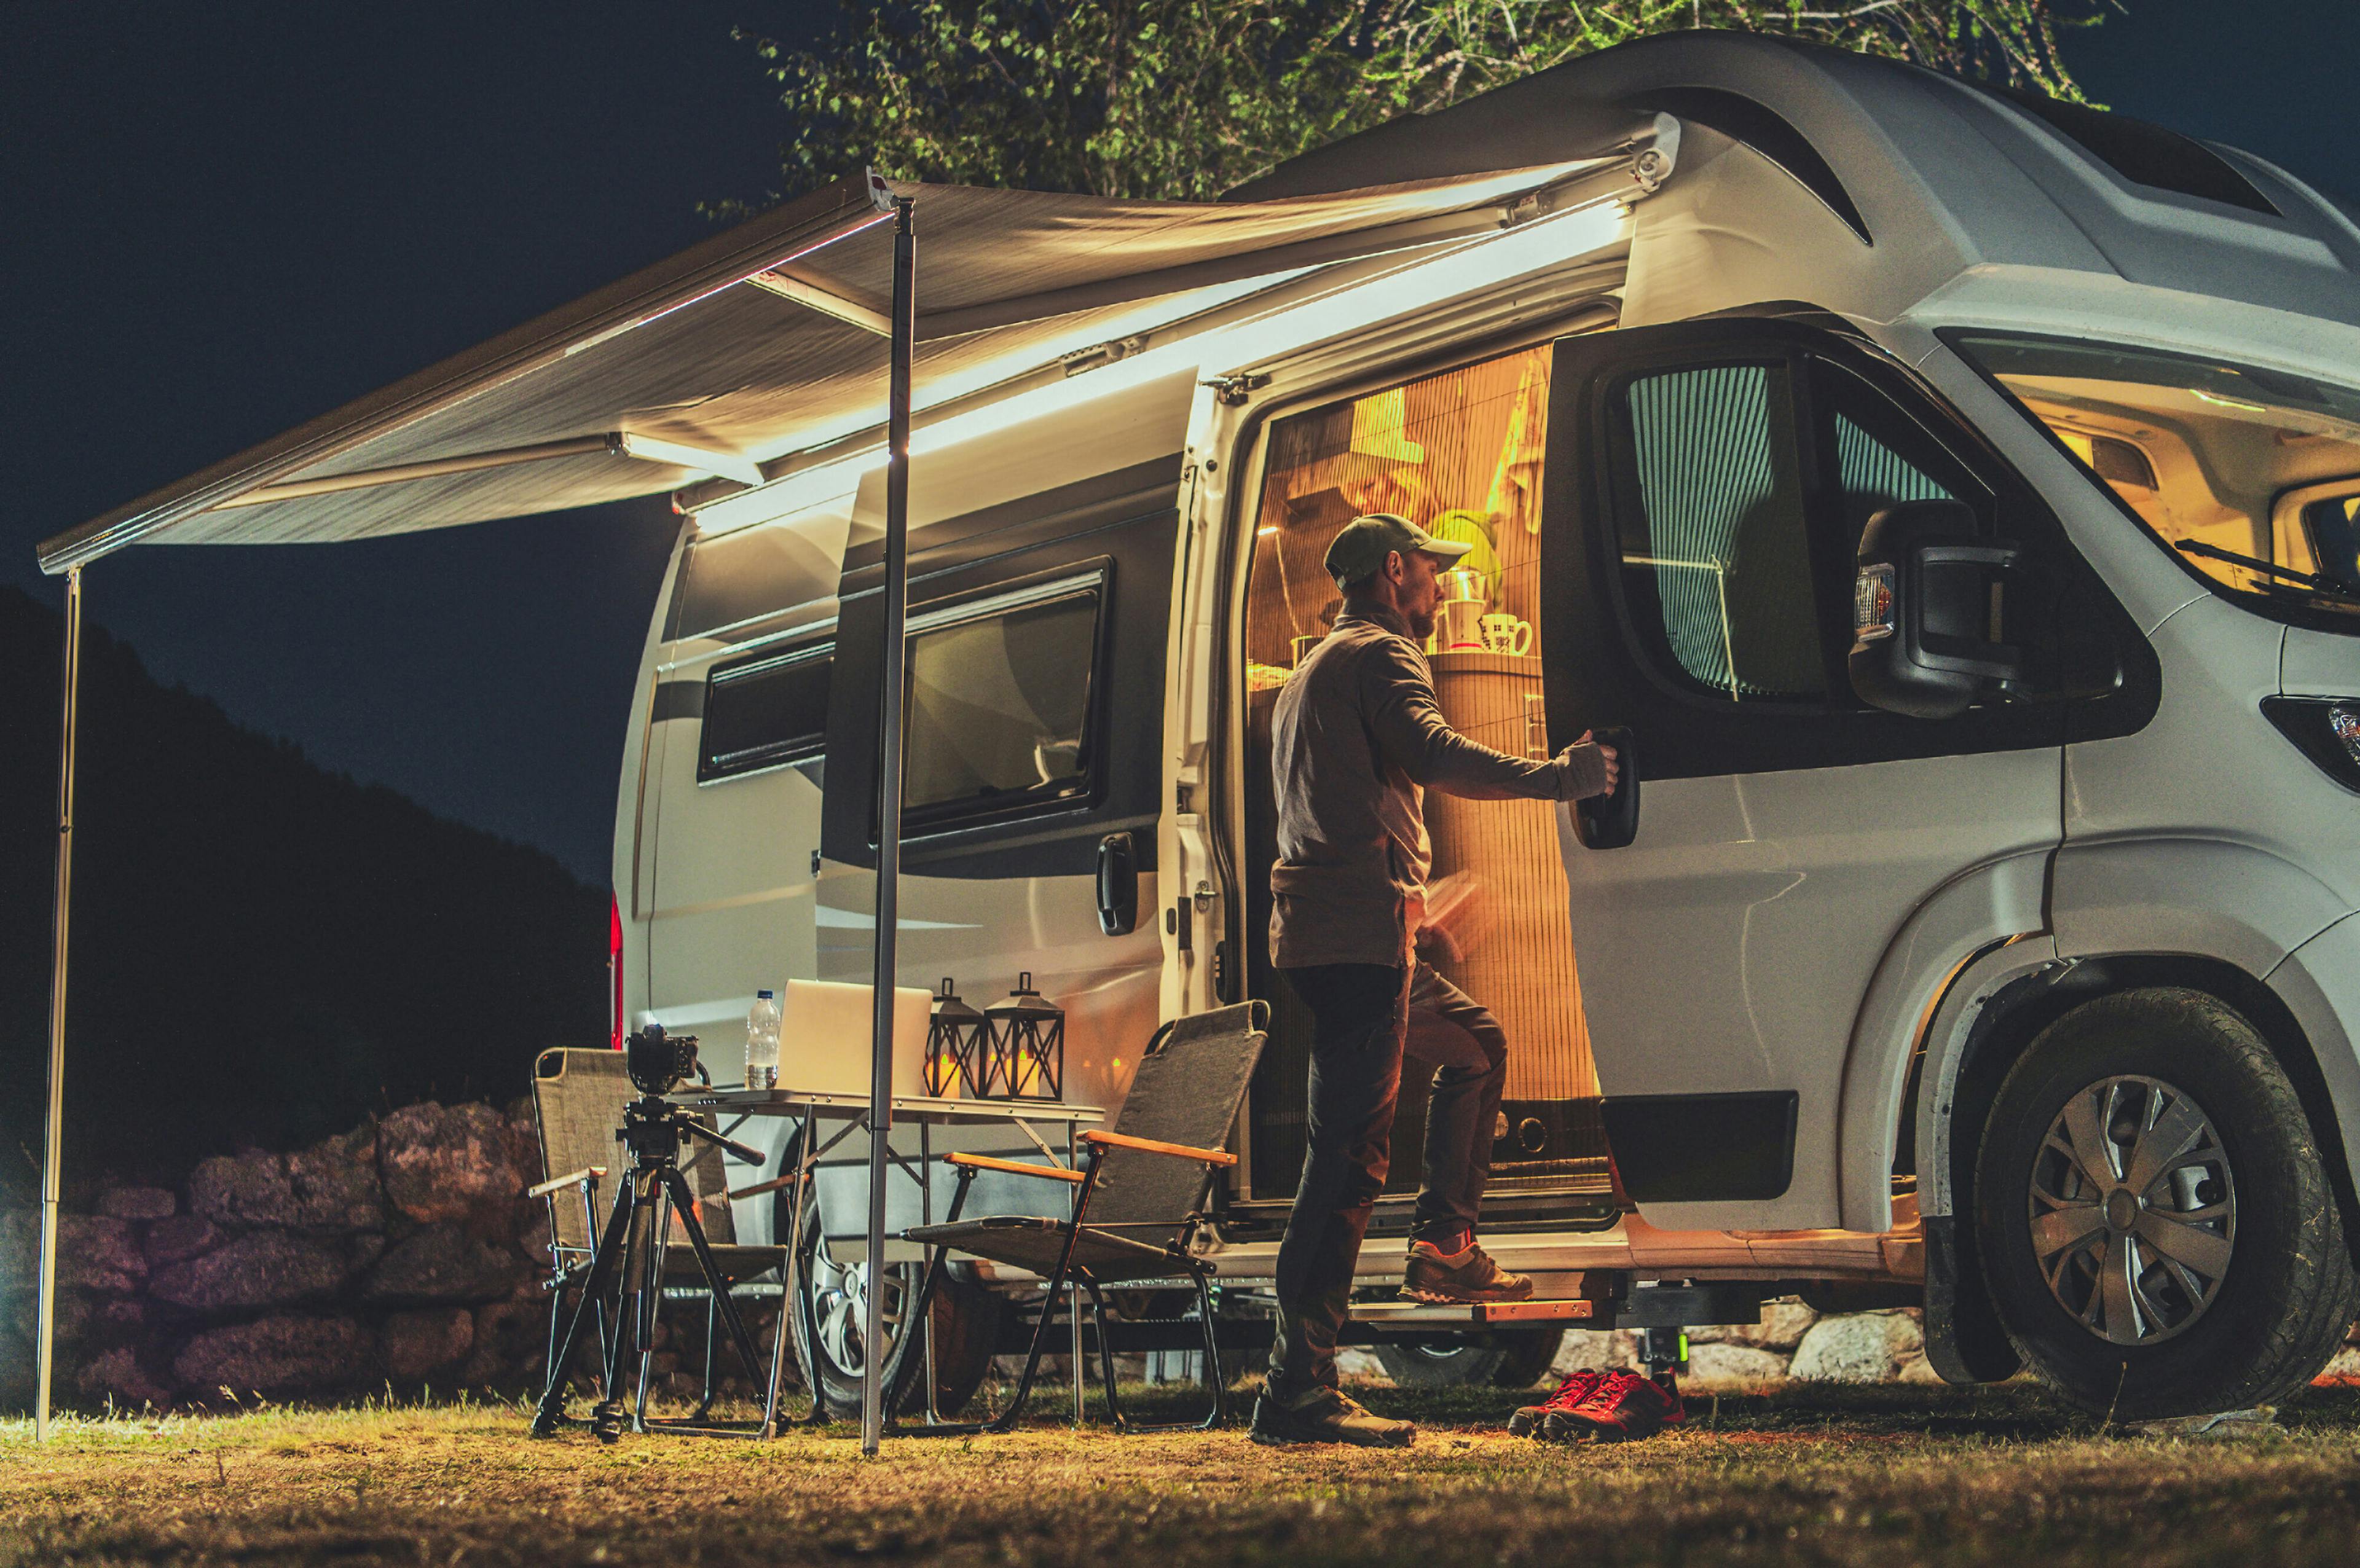 Insurance for renting out your RV